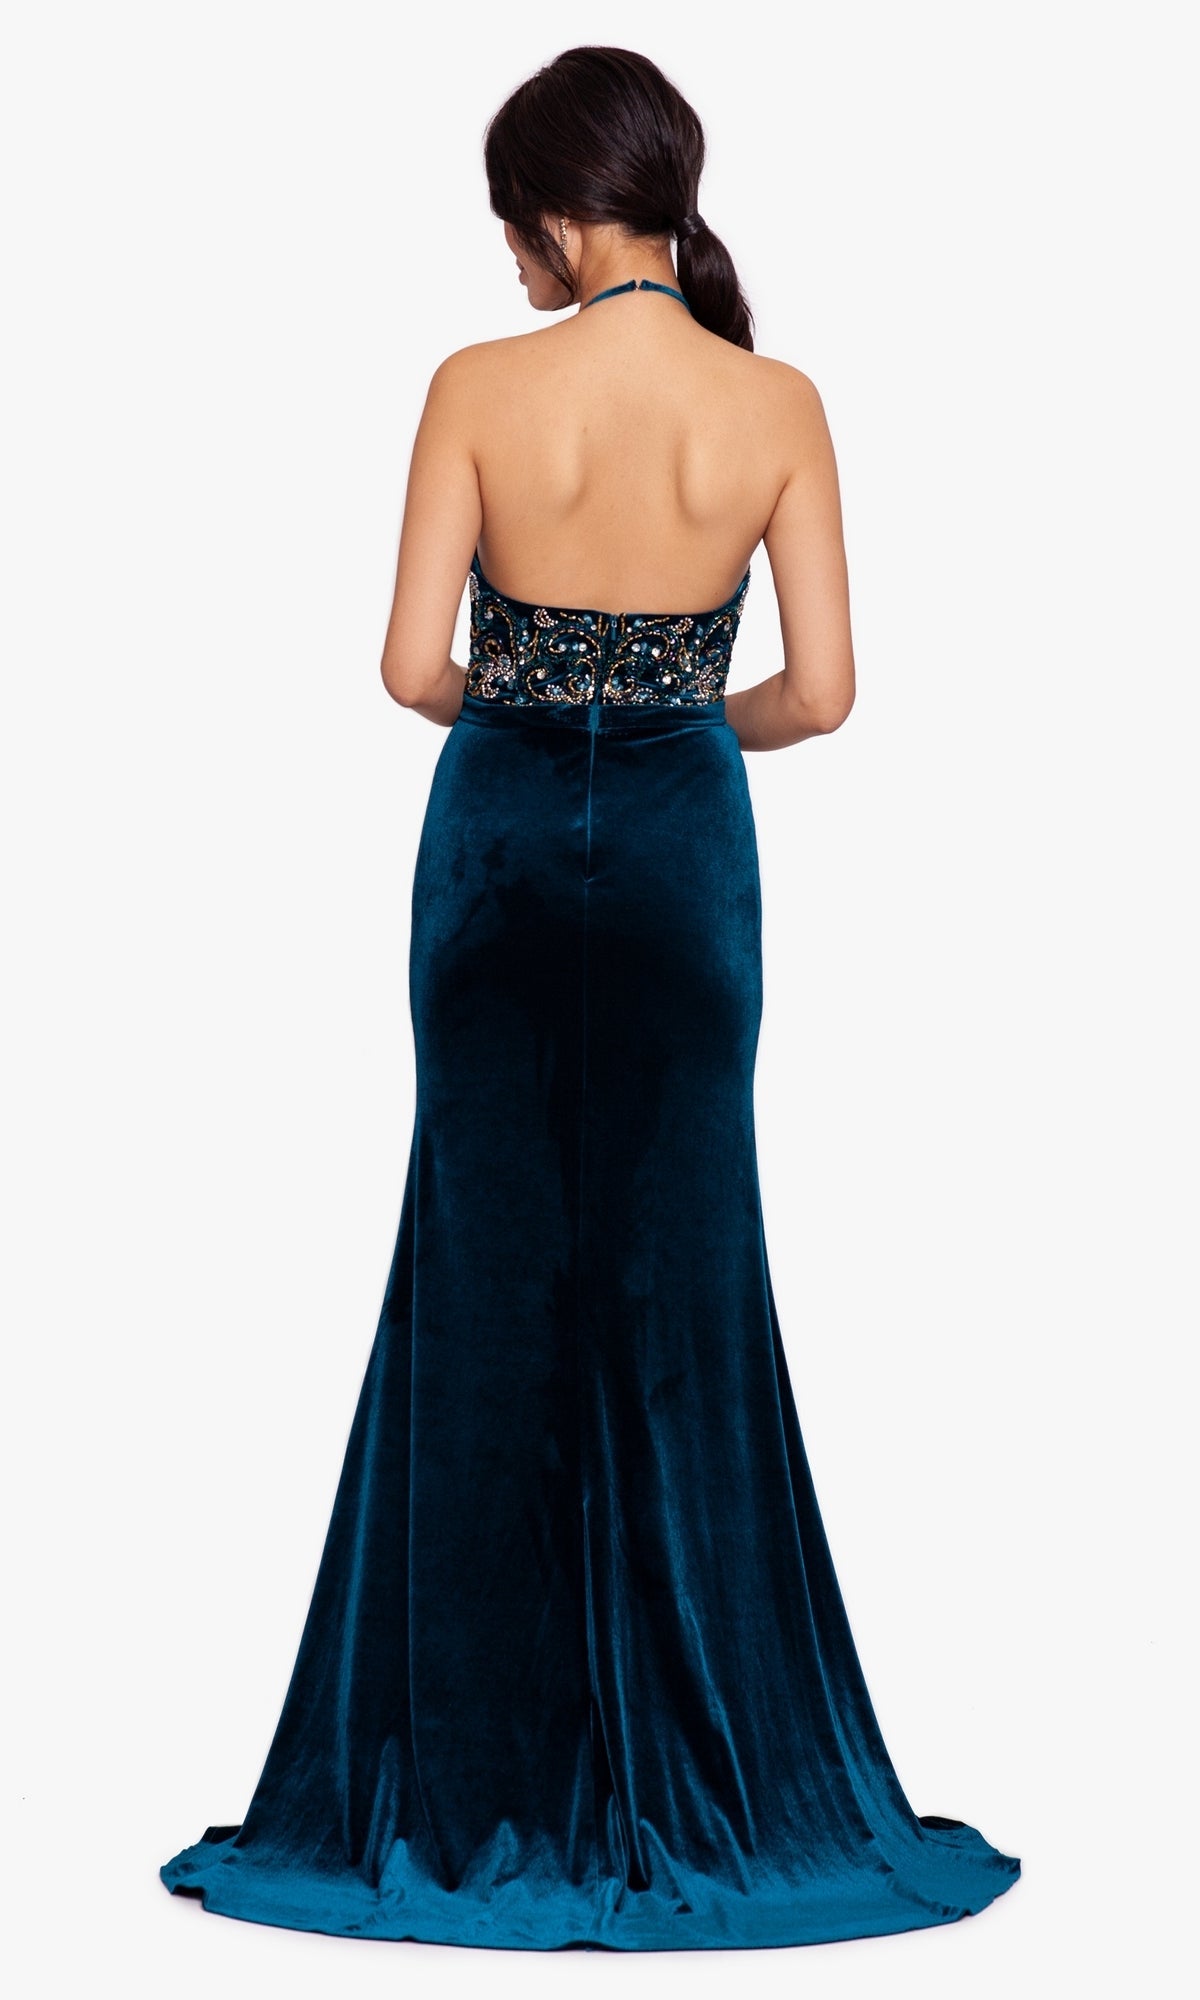  Formal Long Dress A25172 by Betsy and Adam